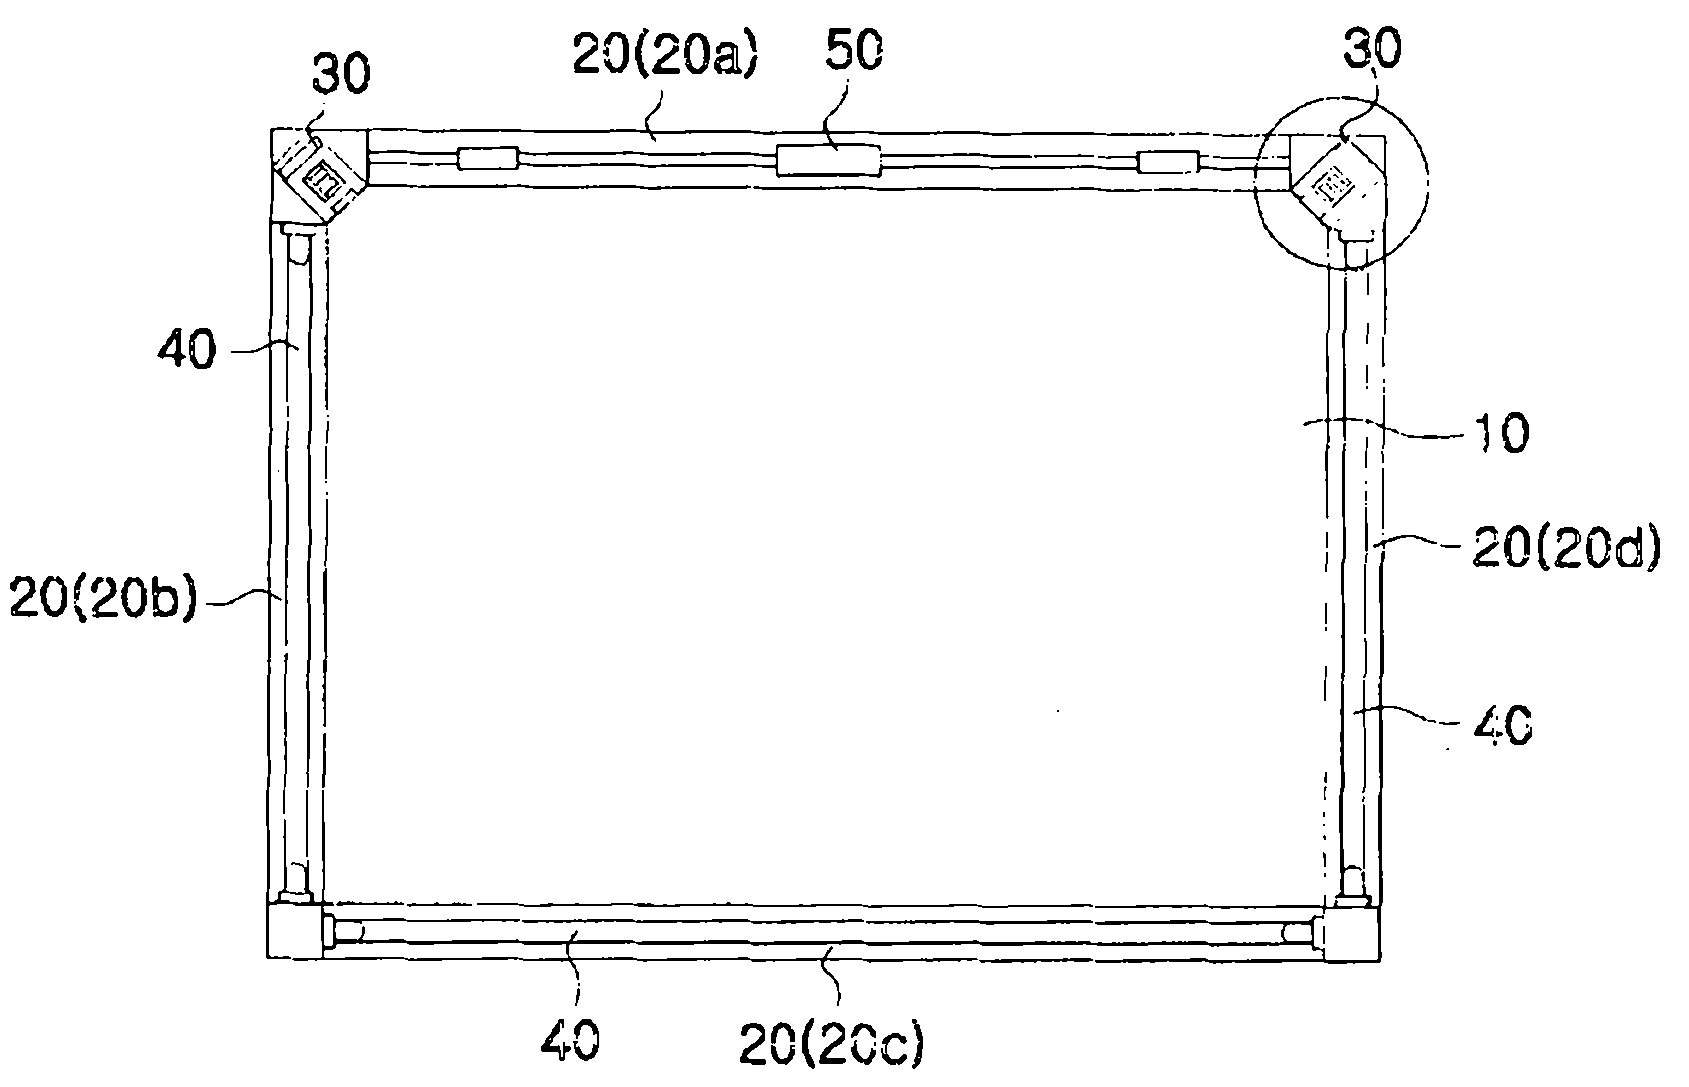 Touch screen adopting an optical module system using linear infrared emitters